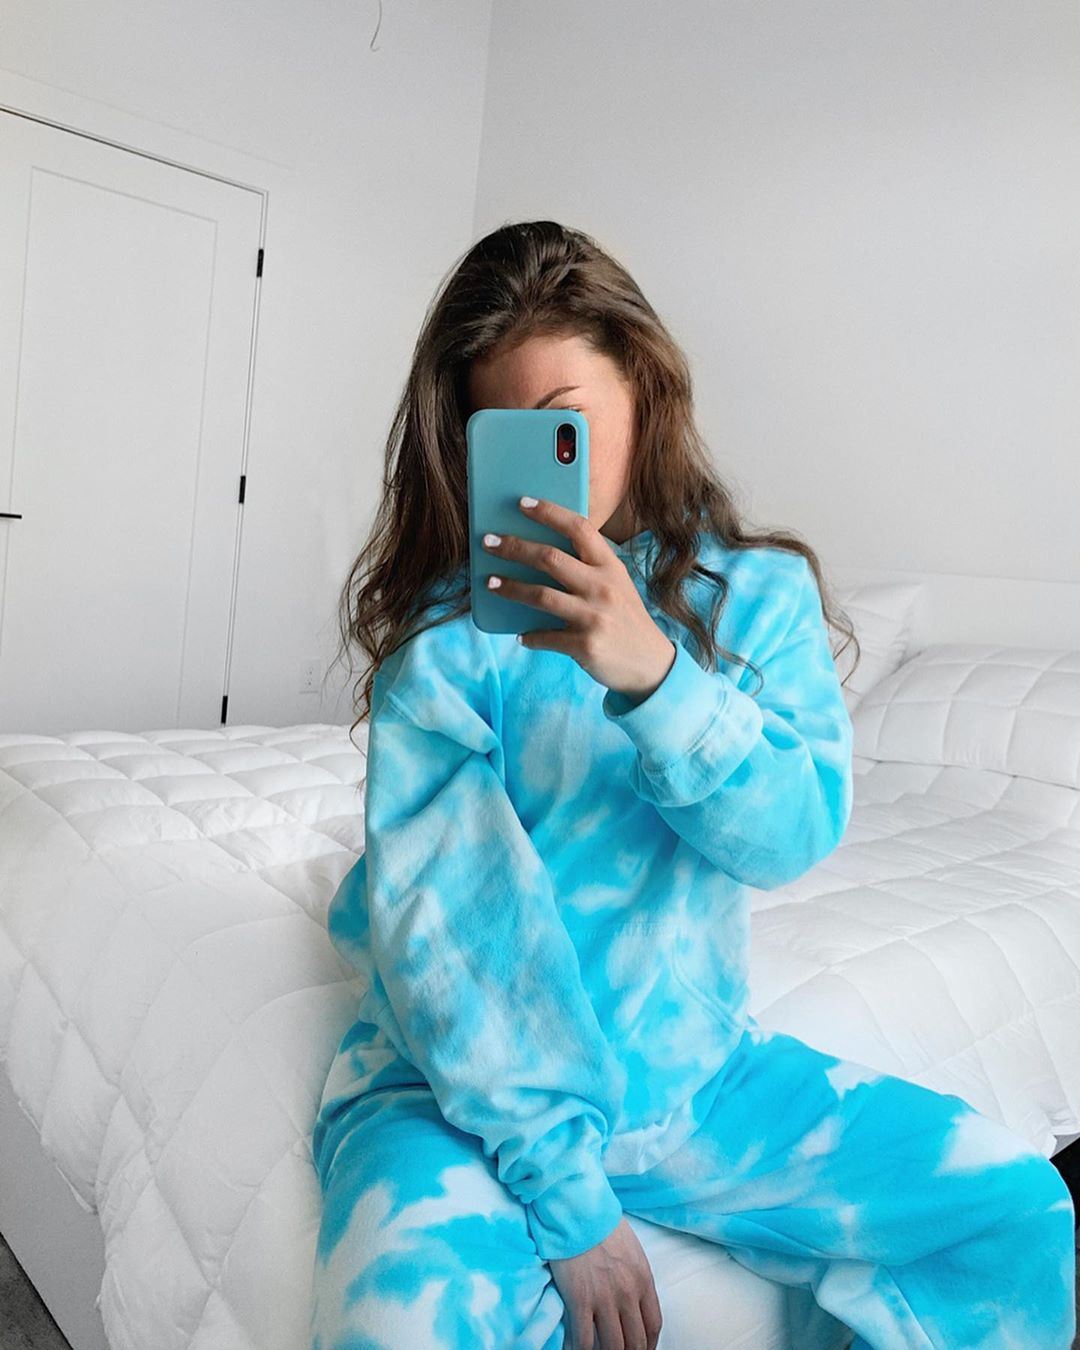 Turquoise crumple tie-dye suit from @haleyly0ns